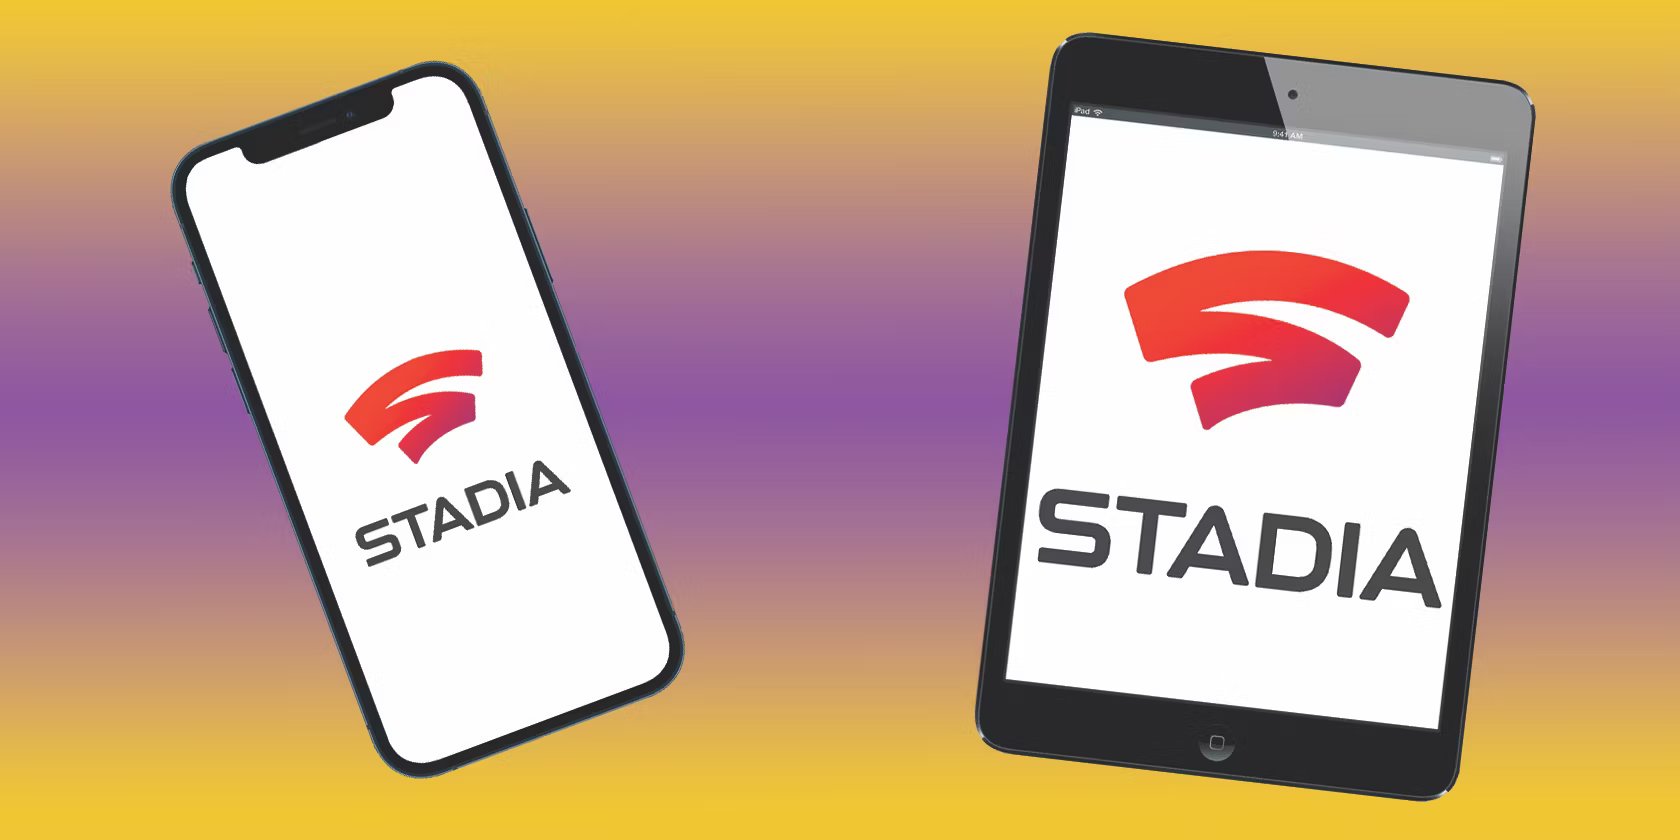 google-stadia-is-now-available-on-ios-devices-via-a-web-app